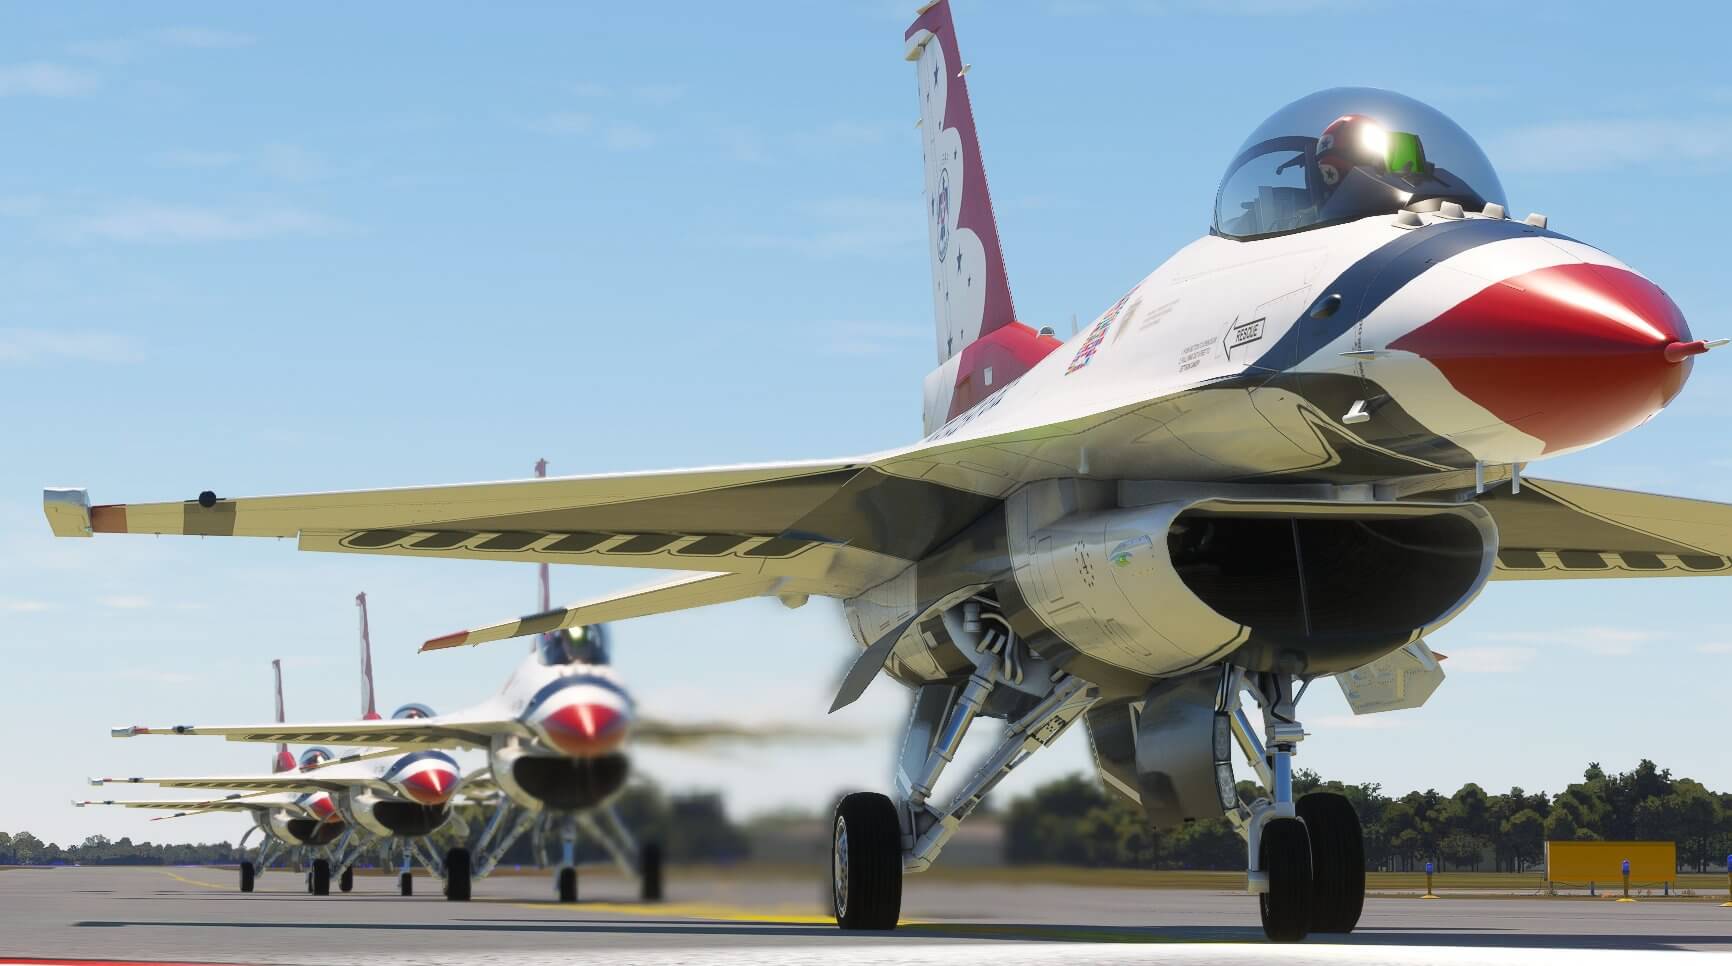 4 F-16 Vipers from the Thunderbirds taxi out for departure in line astern.